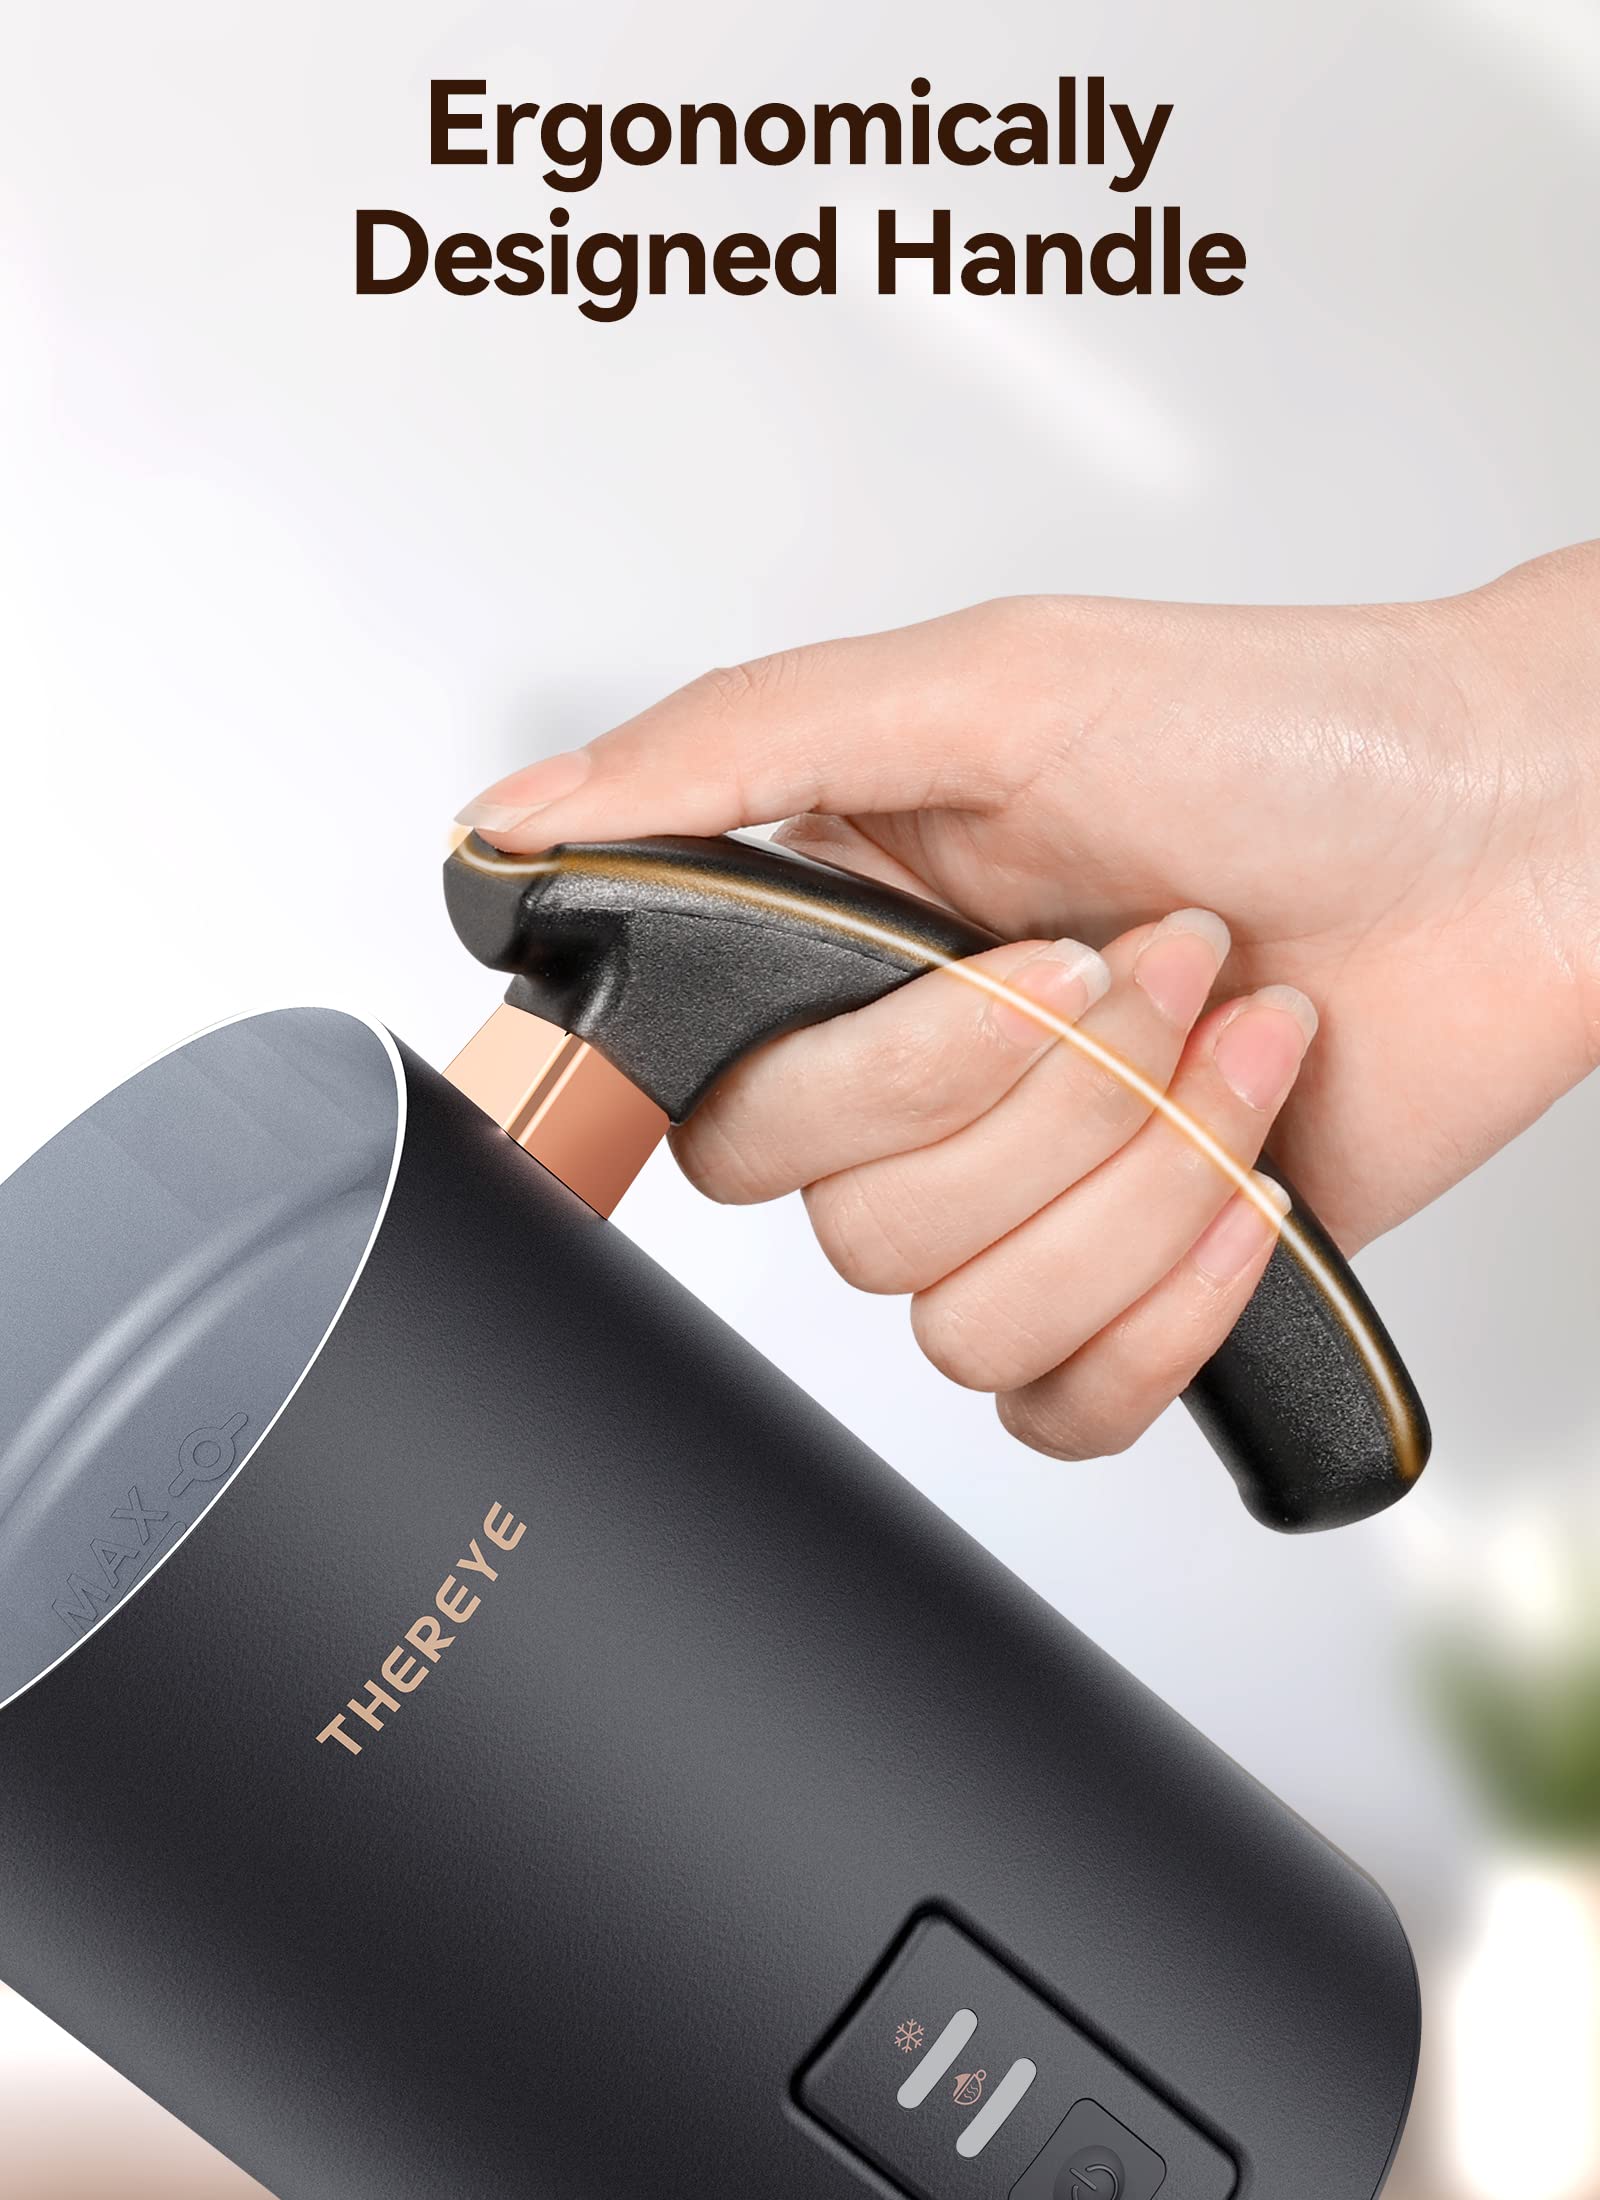 Automatic Milk Frother Electric Hot